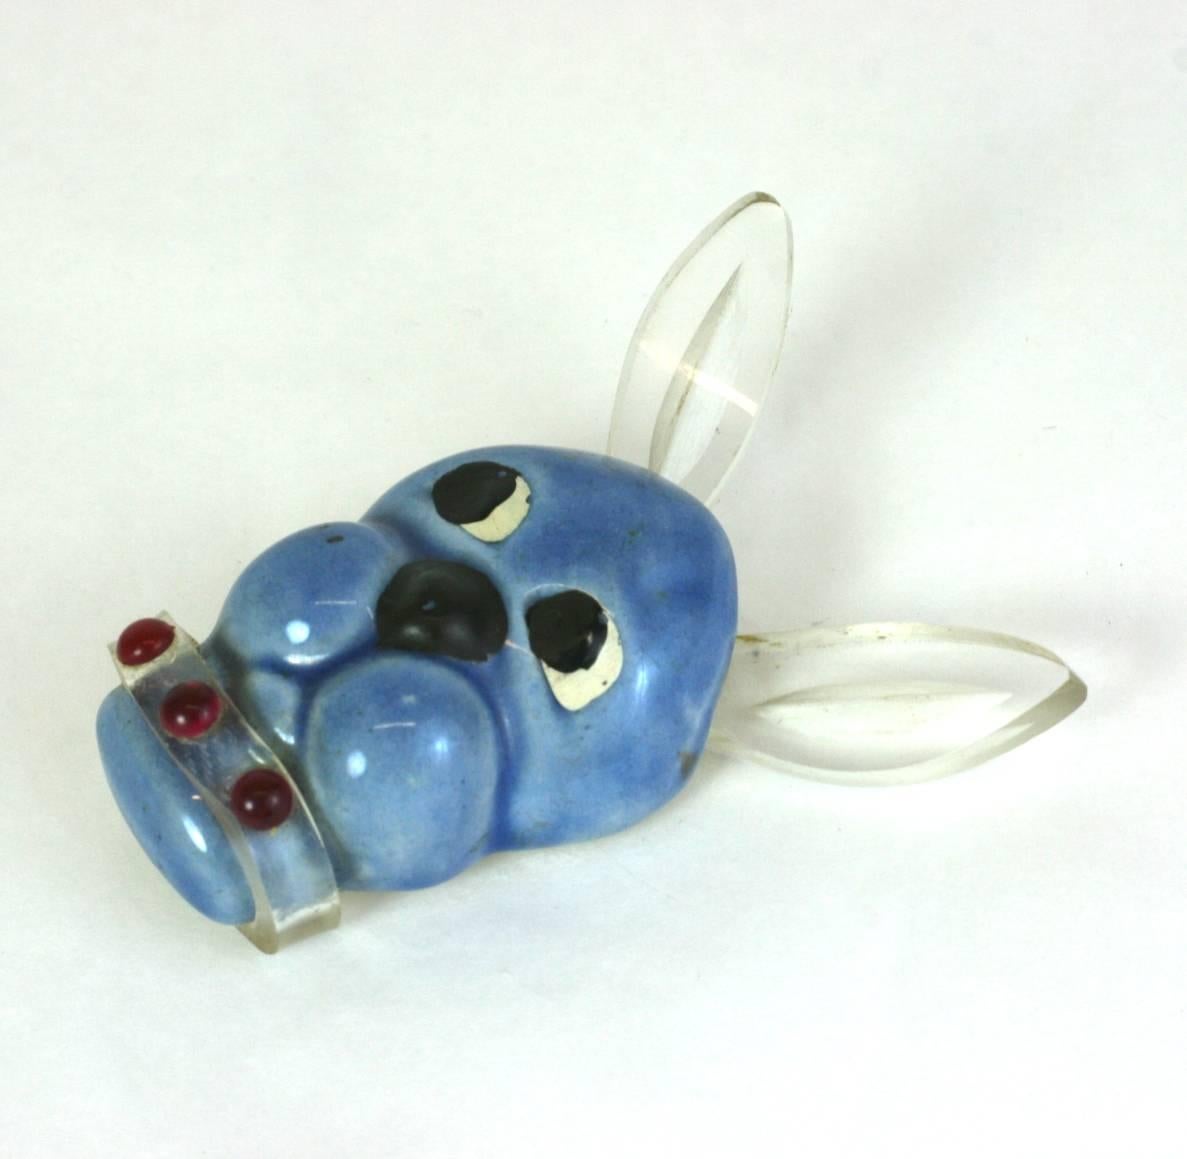 Charming 1940's California Pottery and Lucite Dog brooch by Elzac. Ears and collar are lucite and the pottery head is decorated with over painted details. 
2.25